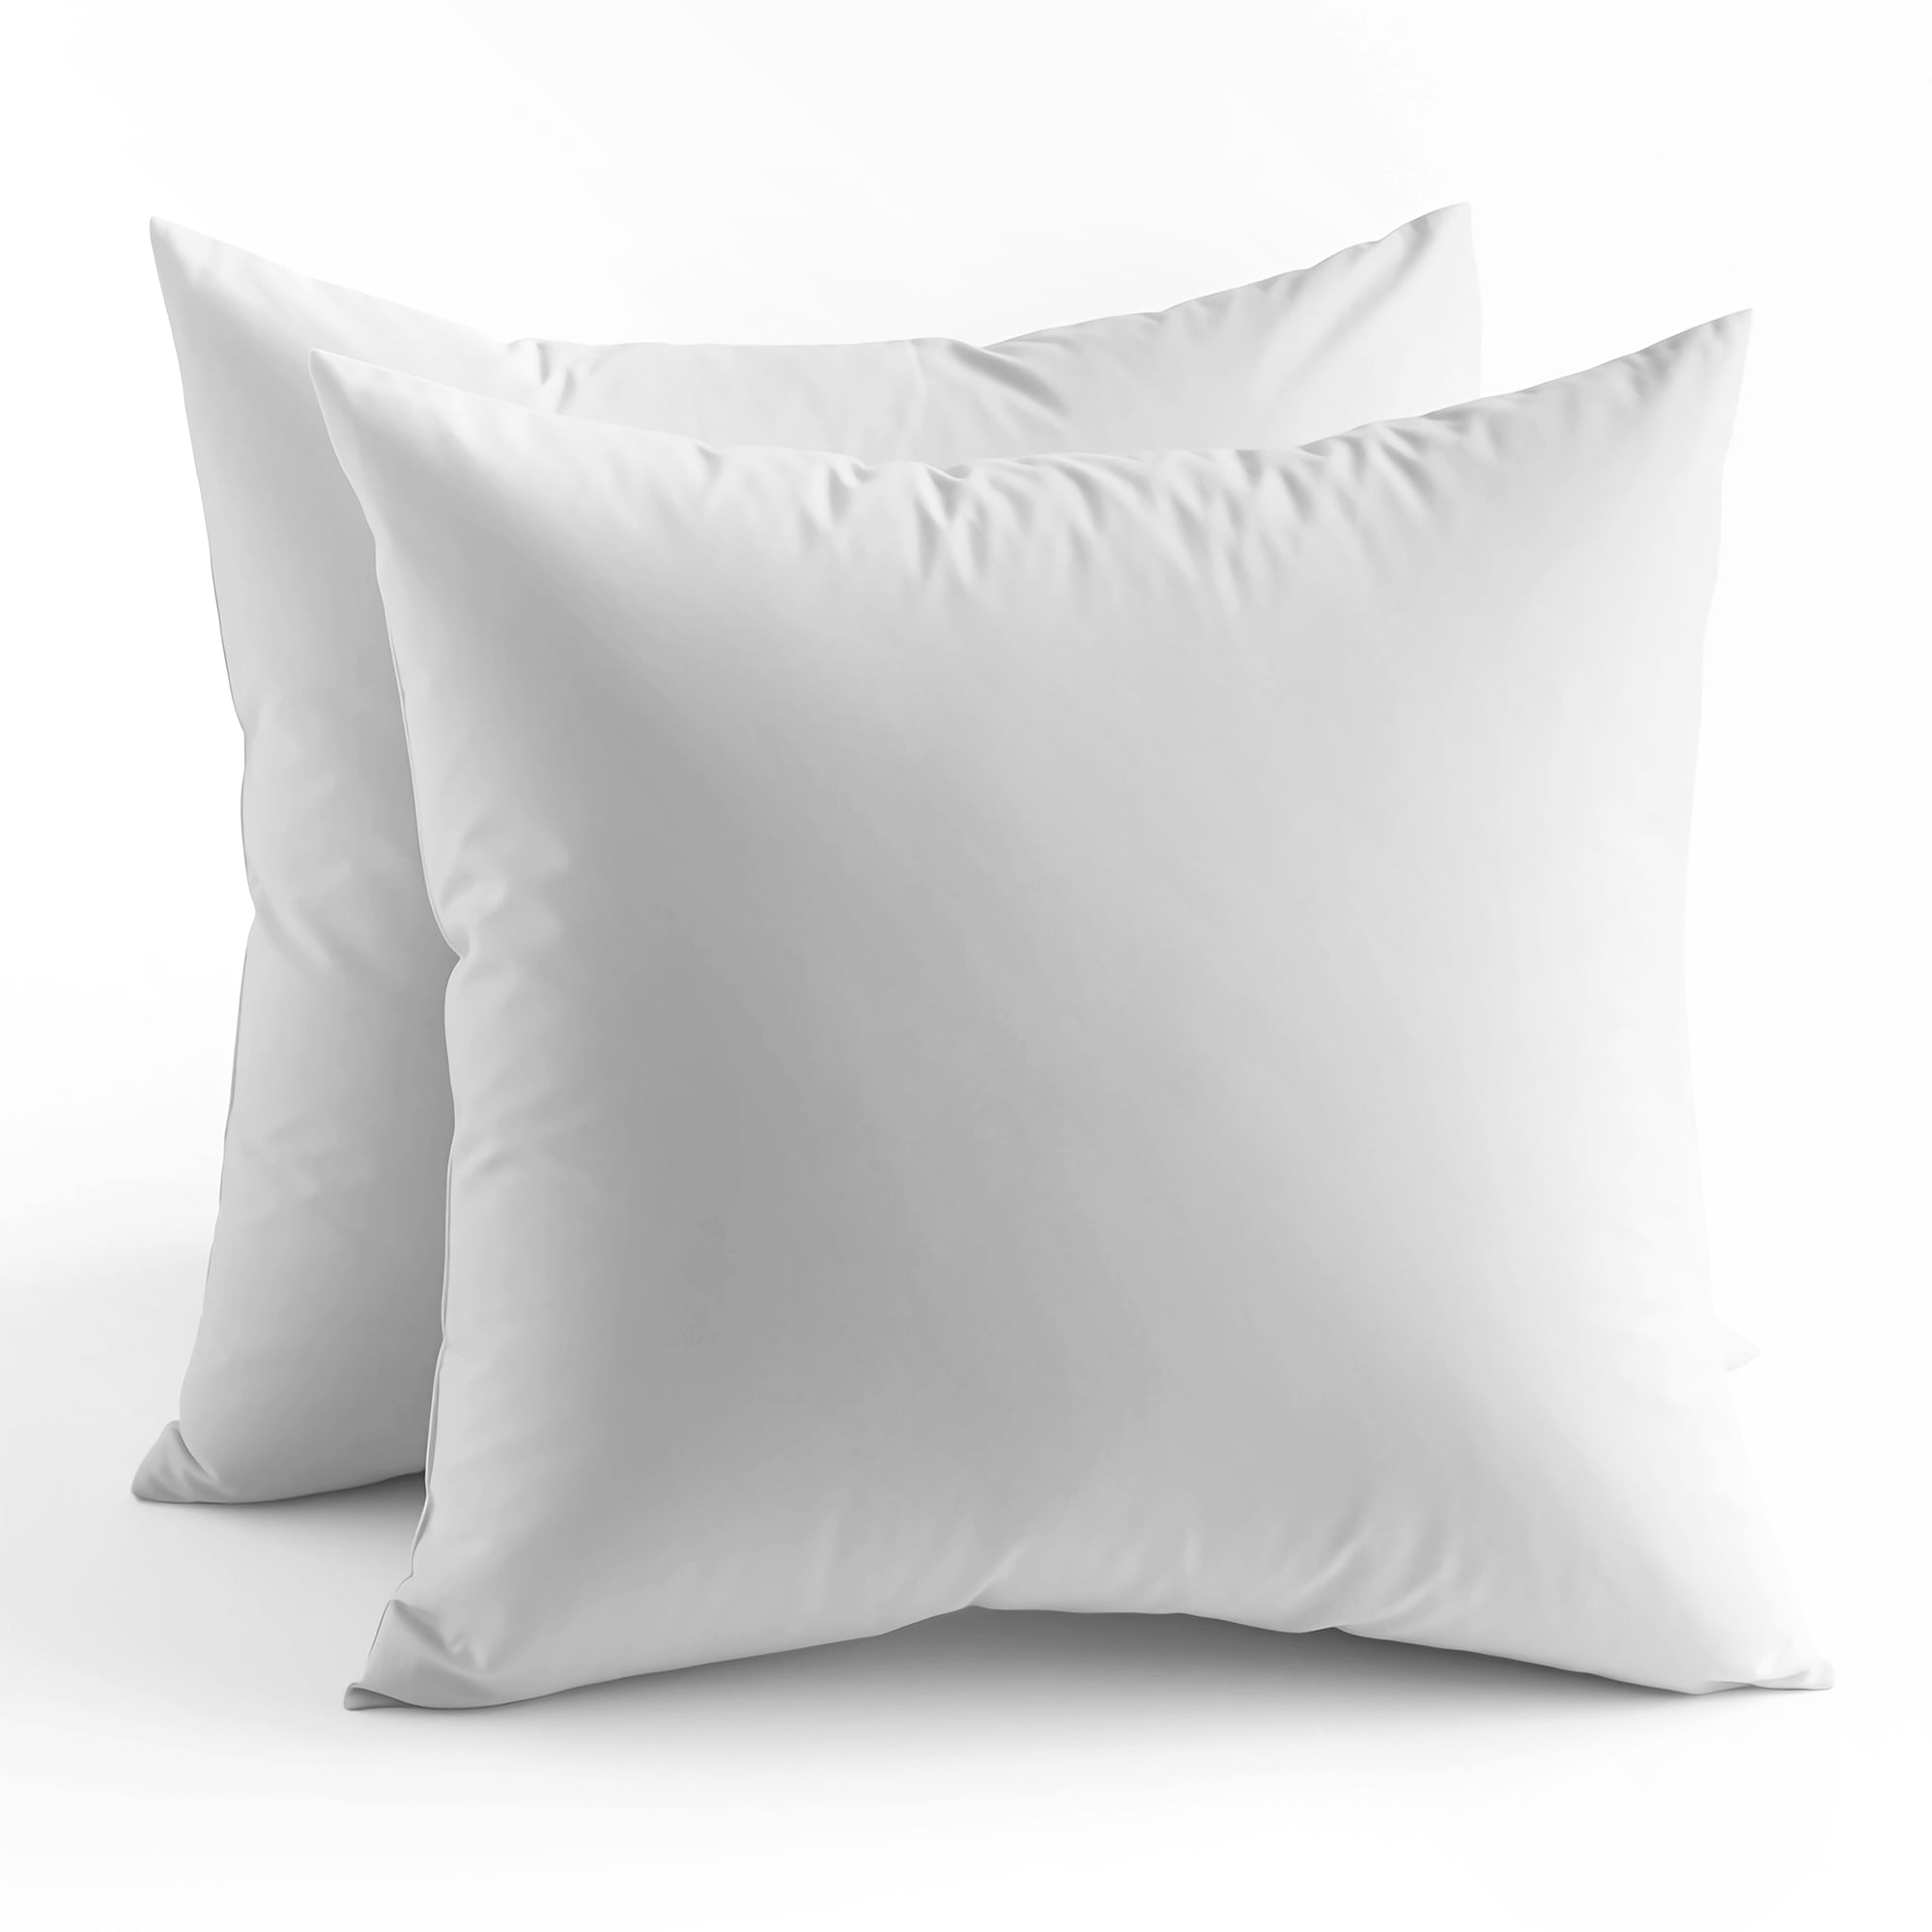 basic home 18x18 Decorative Throw Pillow Inserts-Down Feather Pillow  Inserts-Square-Cotton Fabric-Set of 2-White.